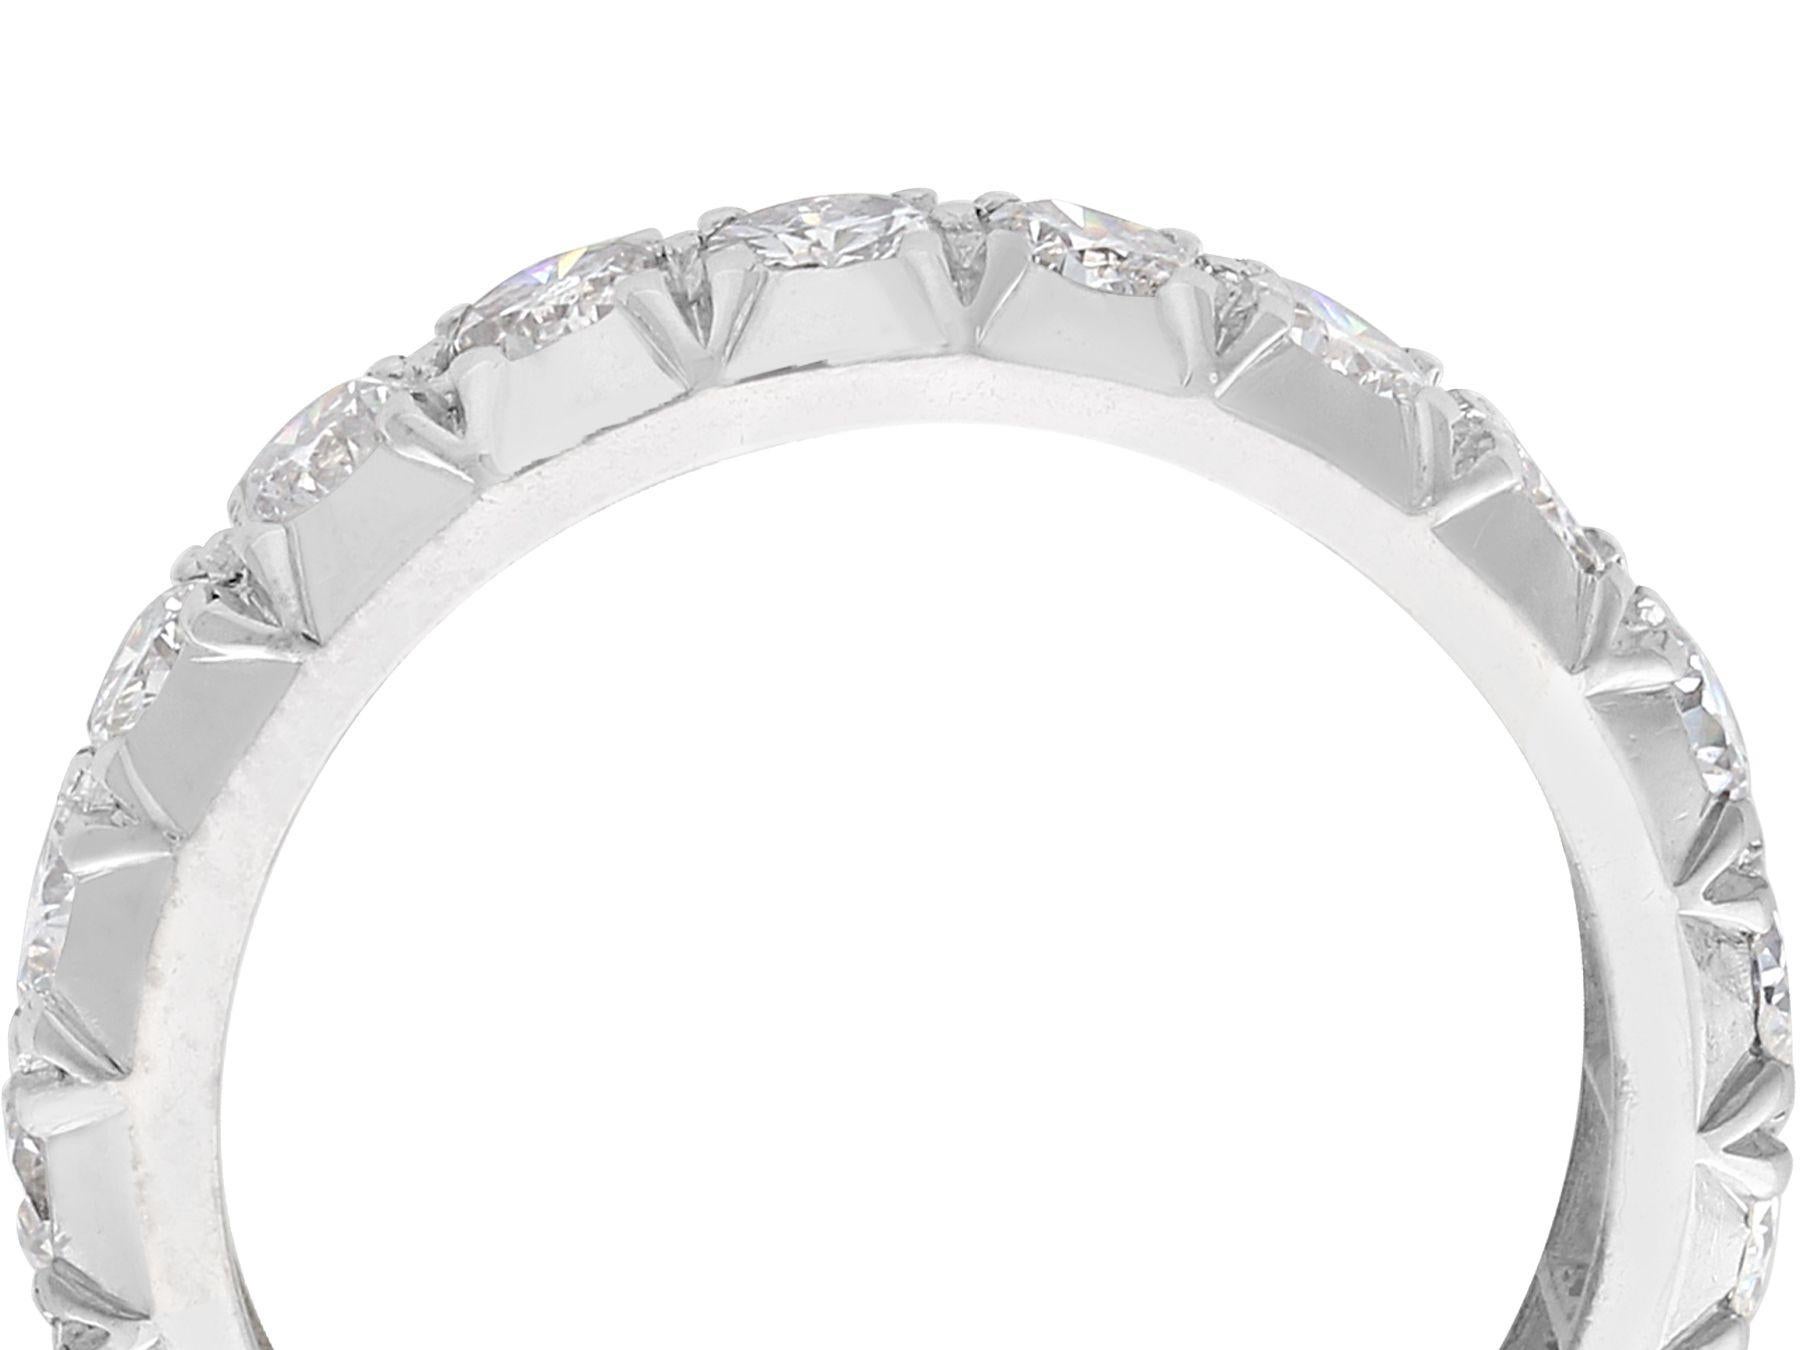 A fine and impressive vintage 1940s 1.45 carat diamond and 18 karat white gold full eternity ring; part of our diverse diamond jewelry and estate jewelry collections

This fine and impressive vintage eternity ring has been crafted in 18k white